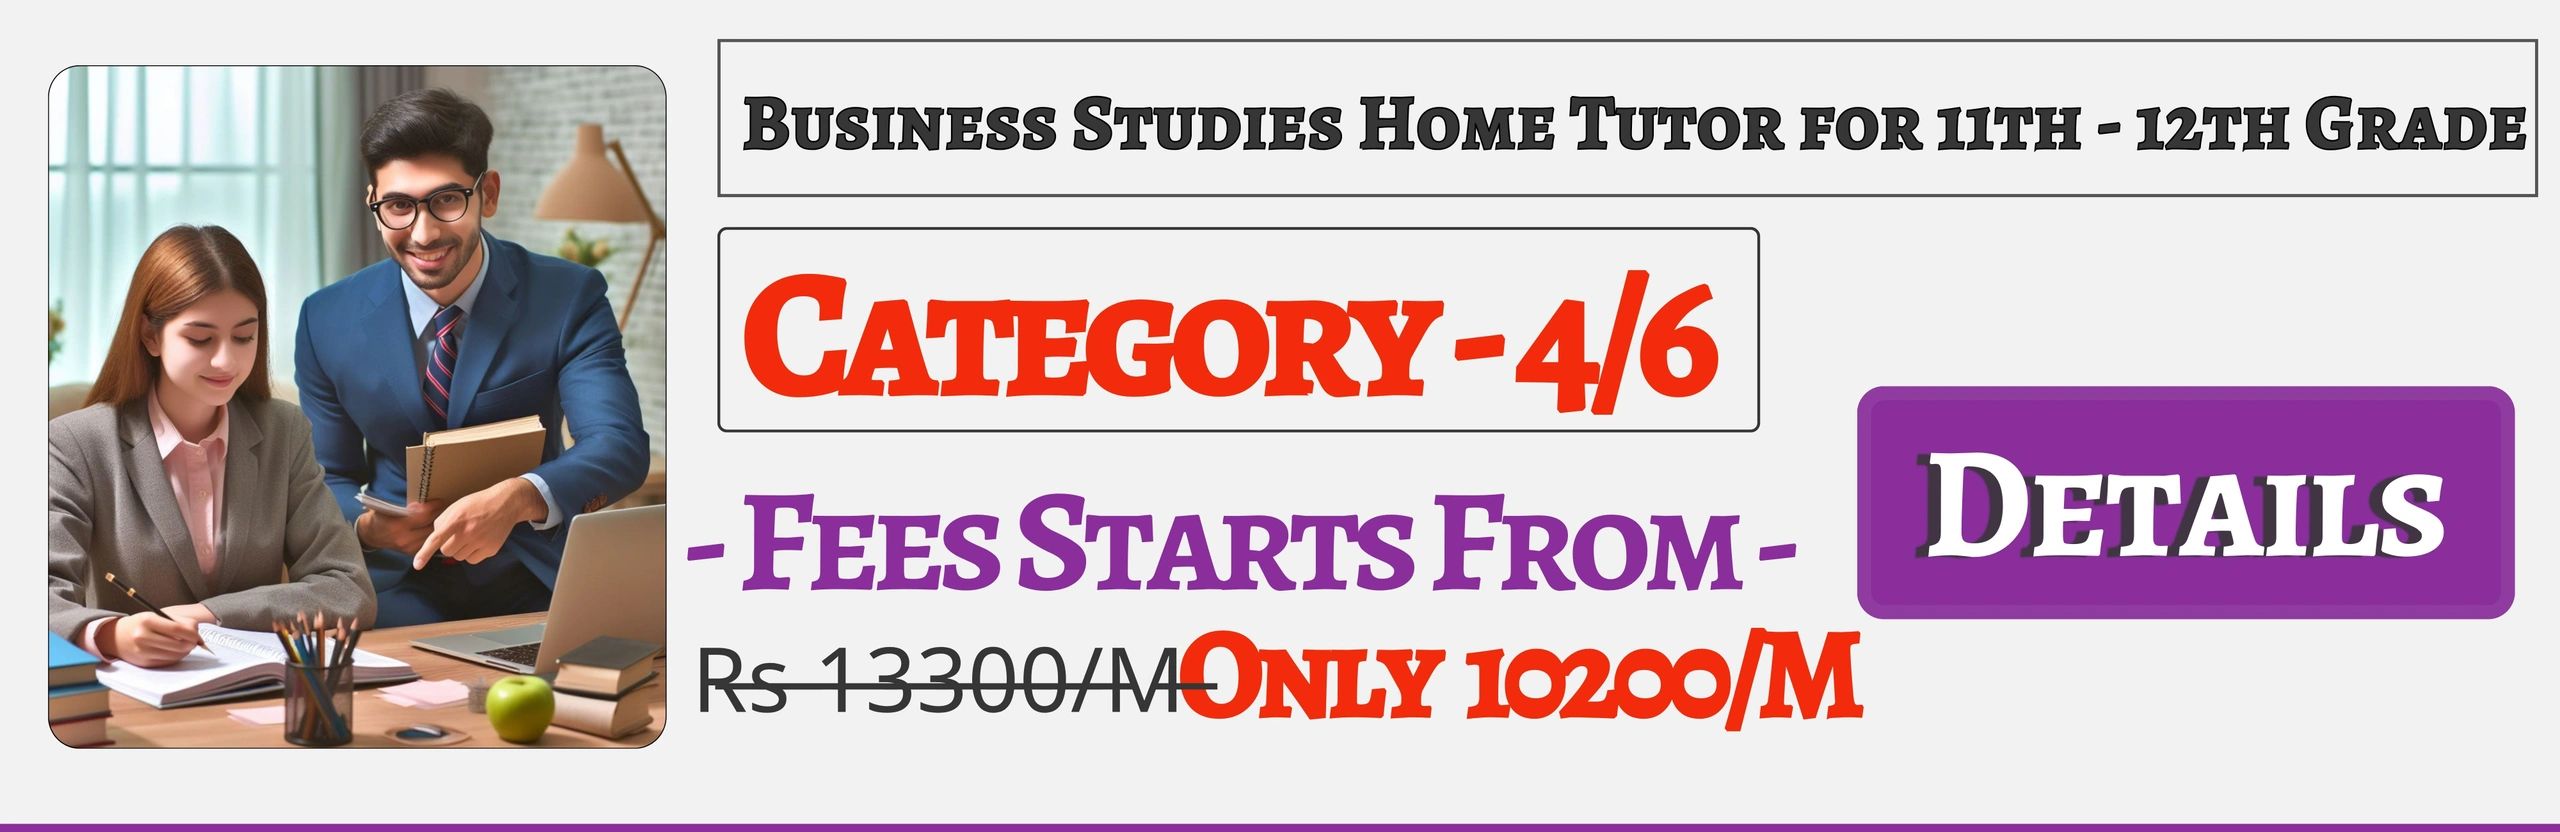 Book Best Nearby Business Studies Home Tuition Tutors For 11th & 12th Jaipur ,Fees Only 10200/M